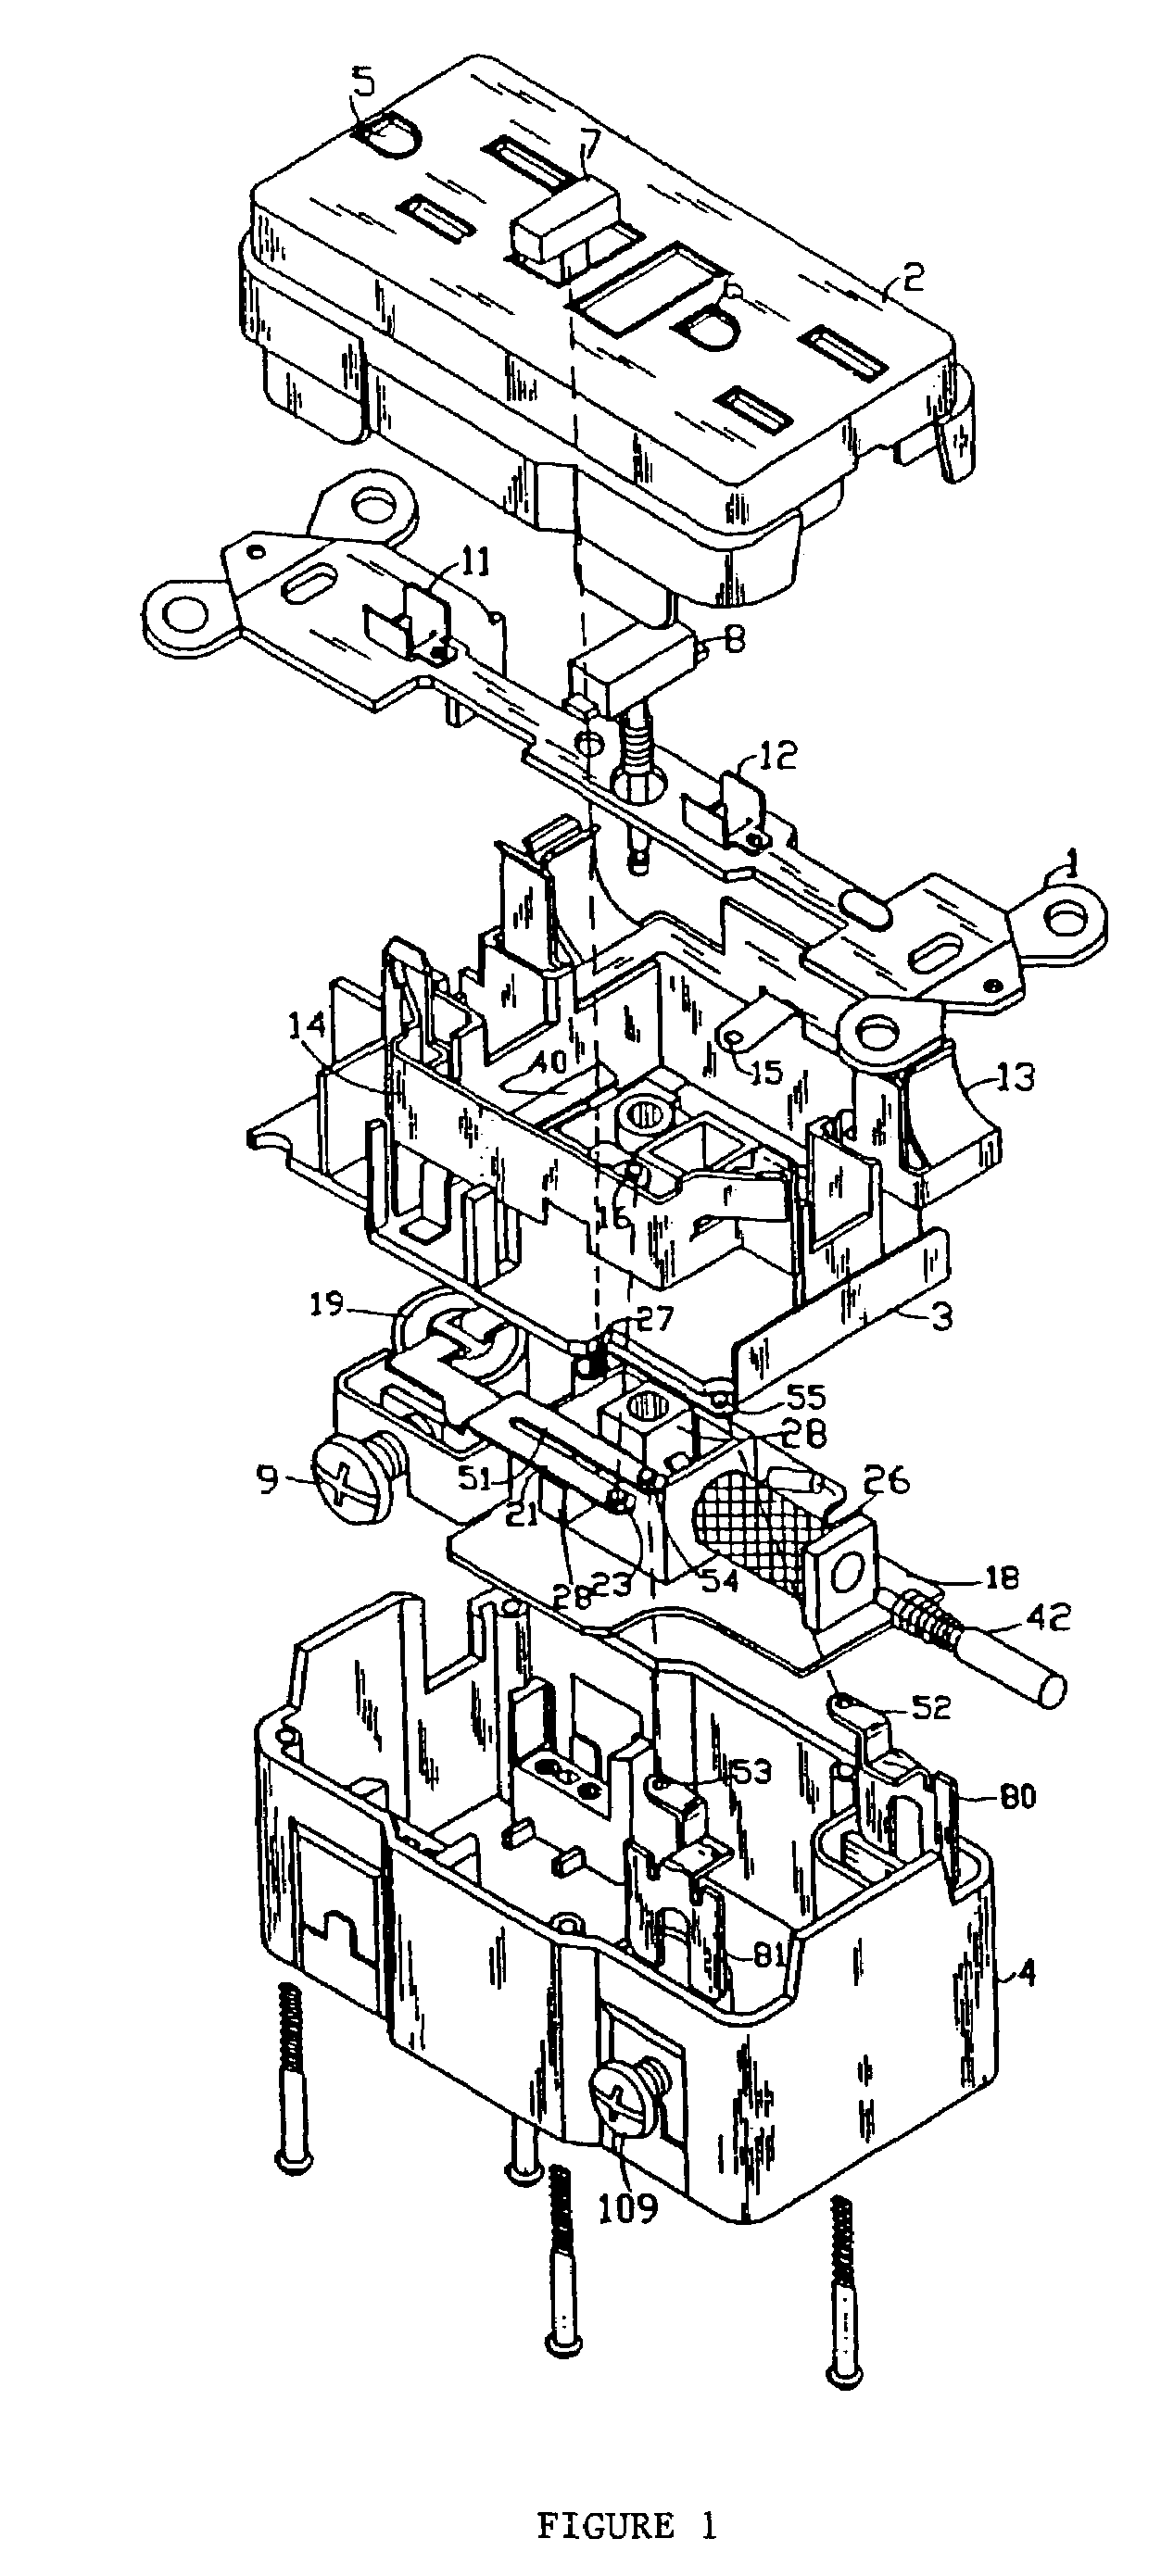 Receptacle device having circuit interrupting and reverse wiring protection